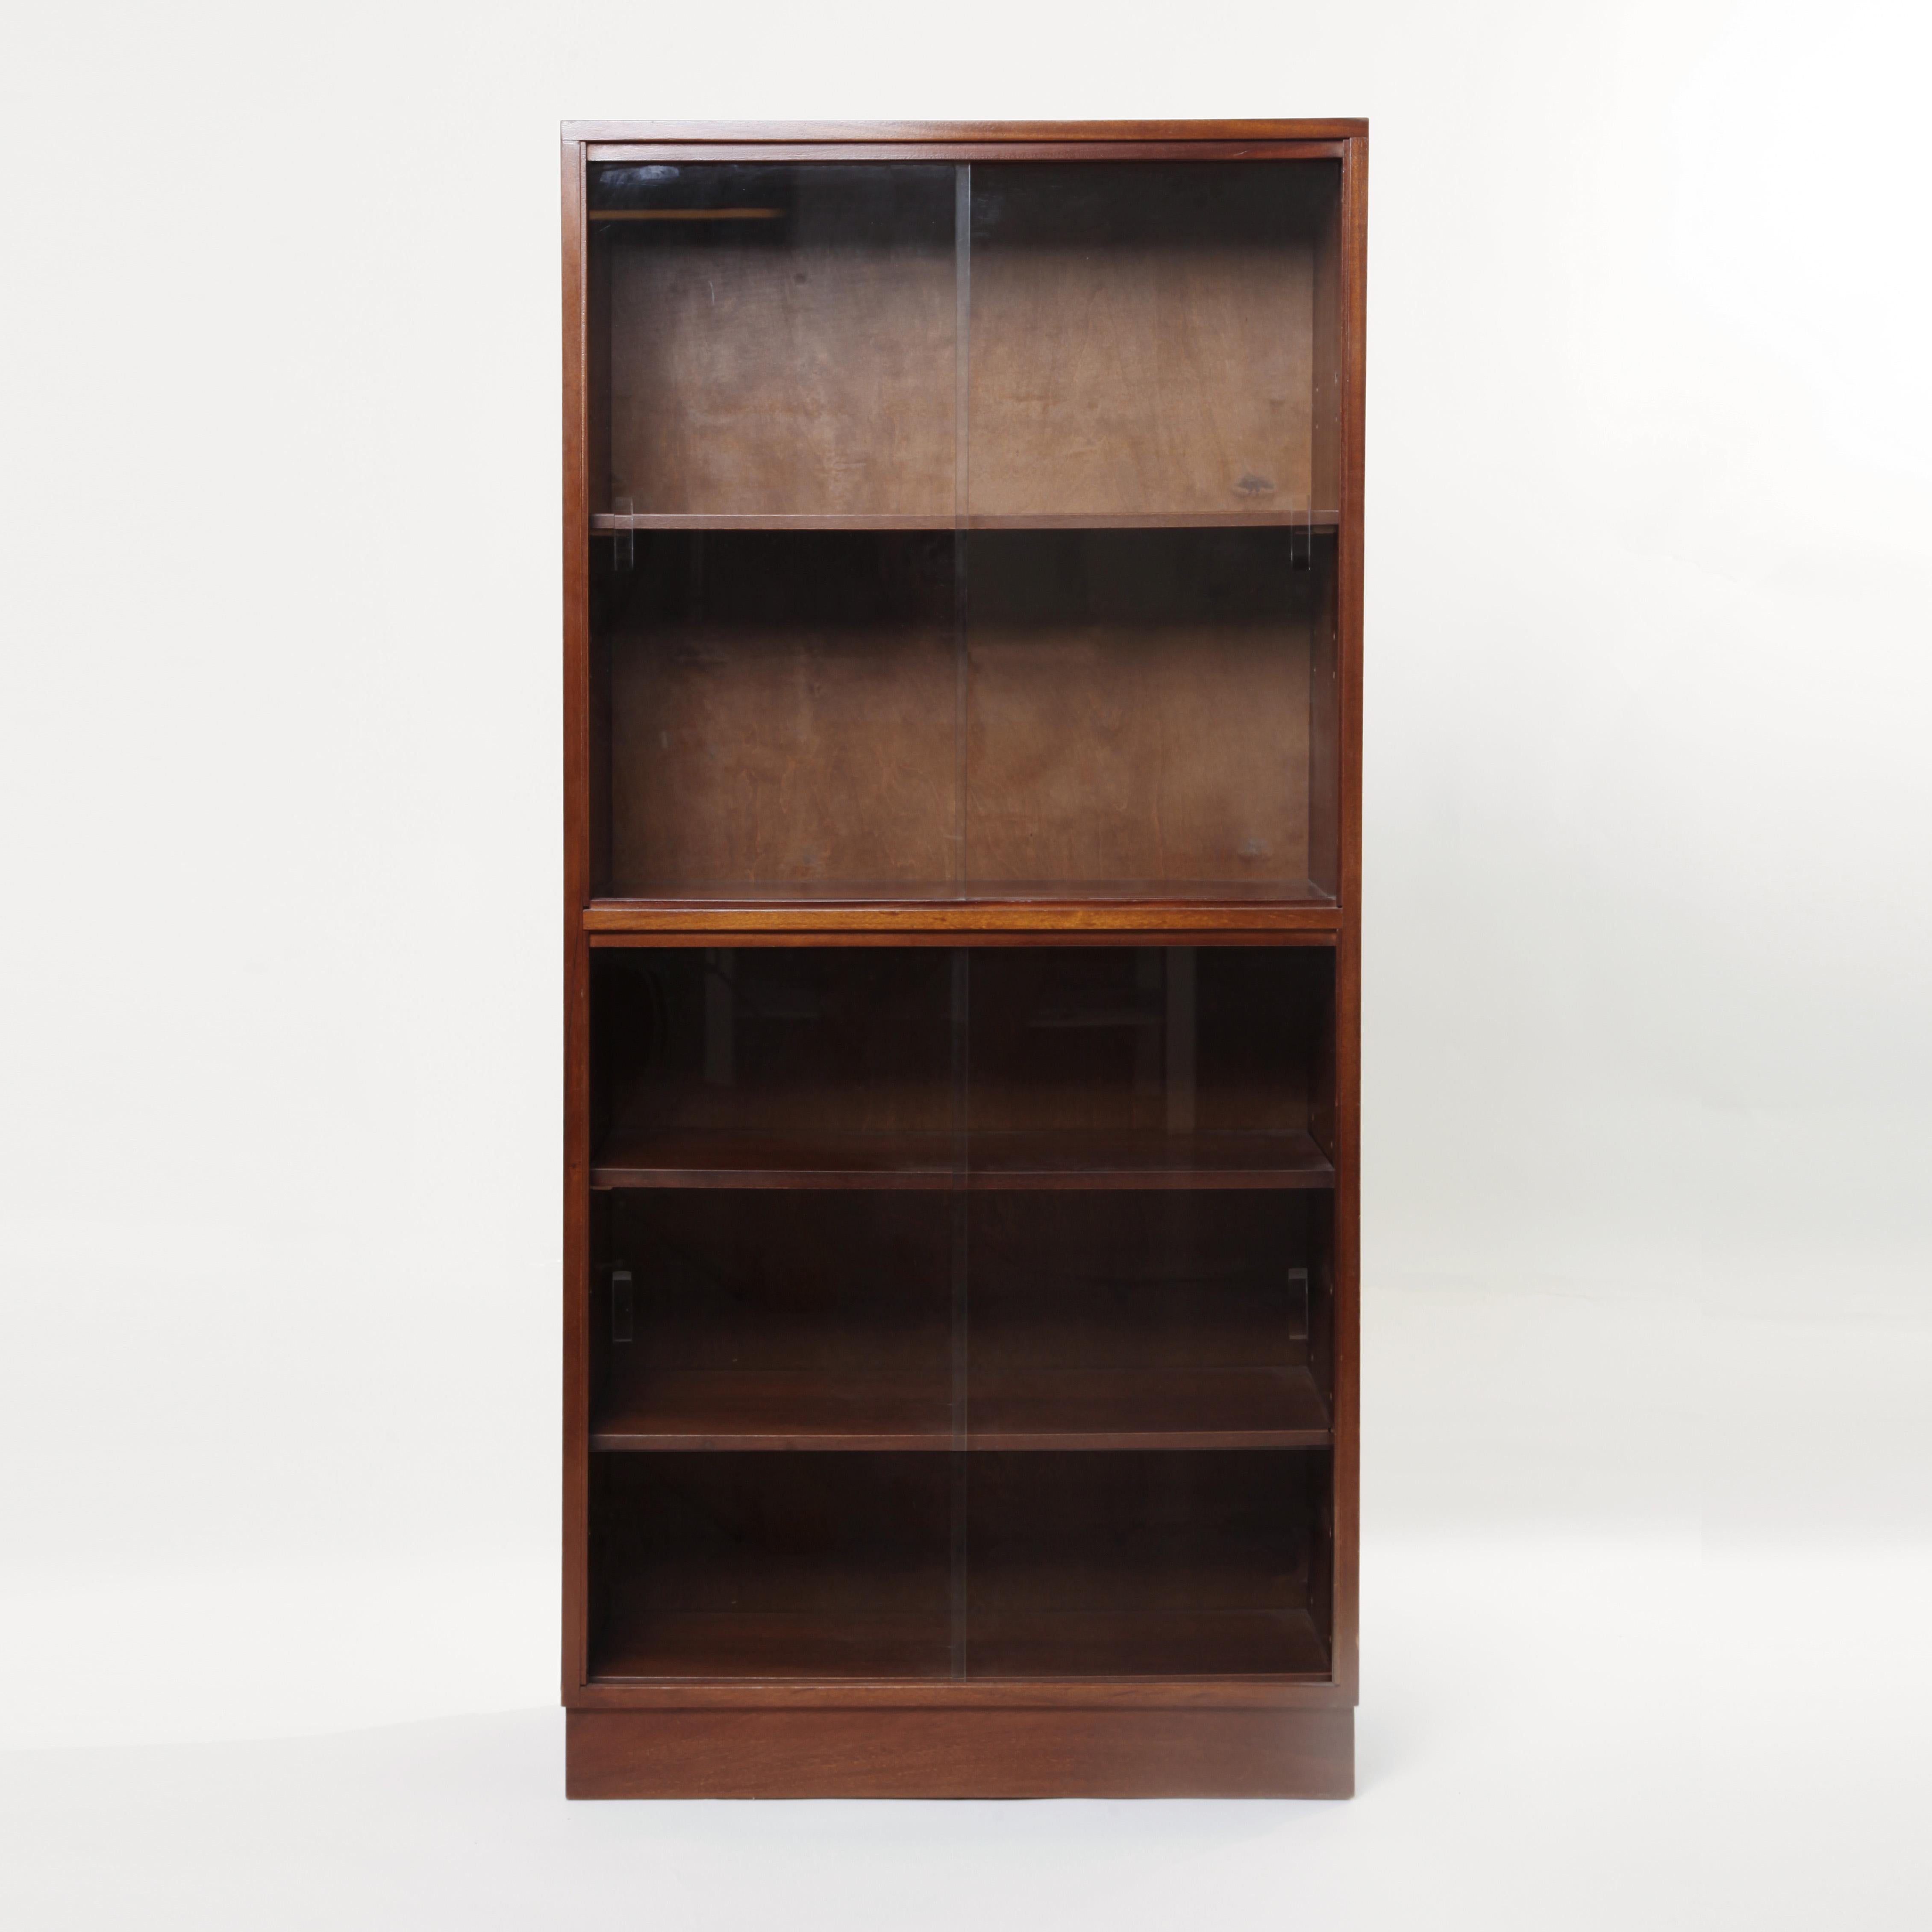 A mahogany display cabinet or bookshelf. Fully fronted glass sliding doors and wood shelves. Original label on the back made in London.